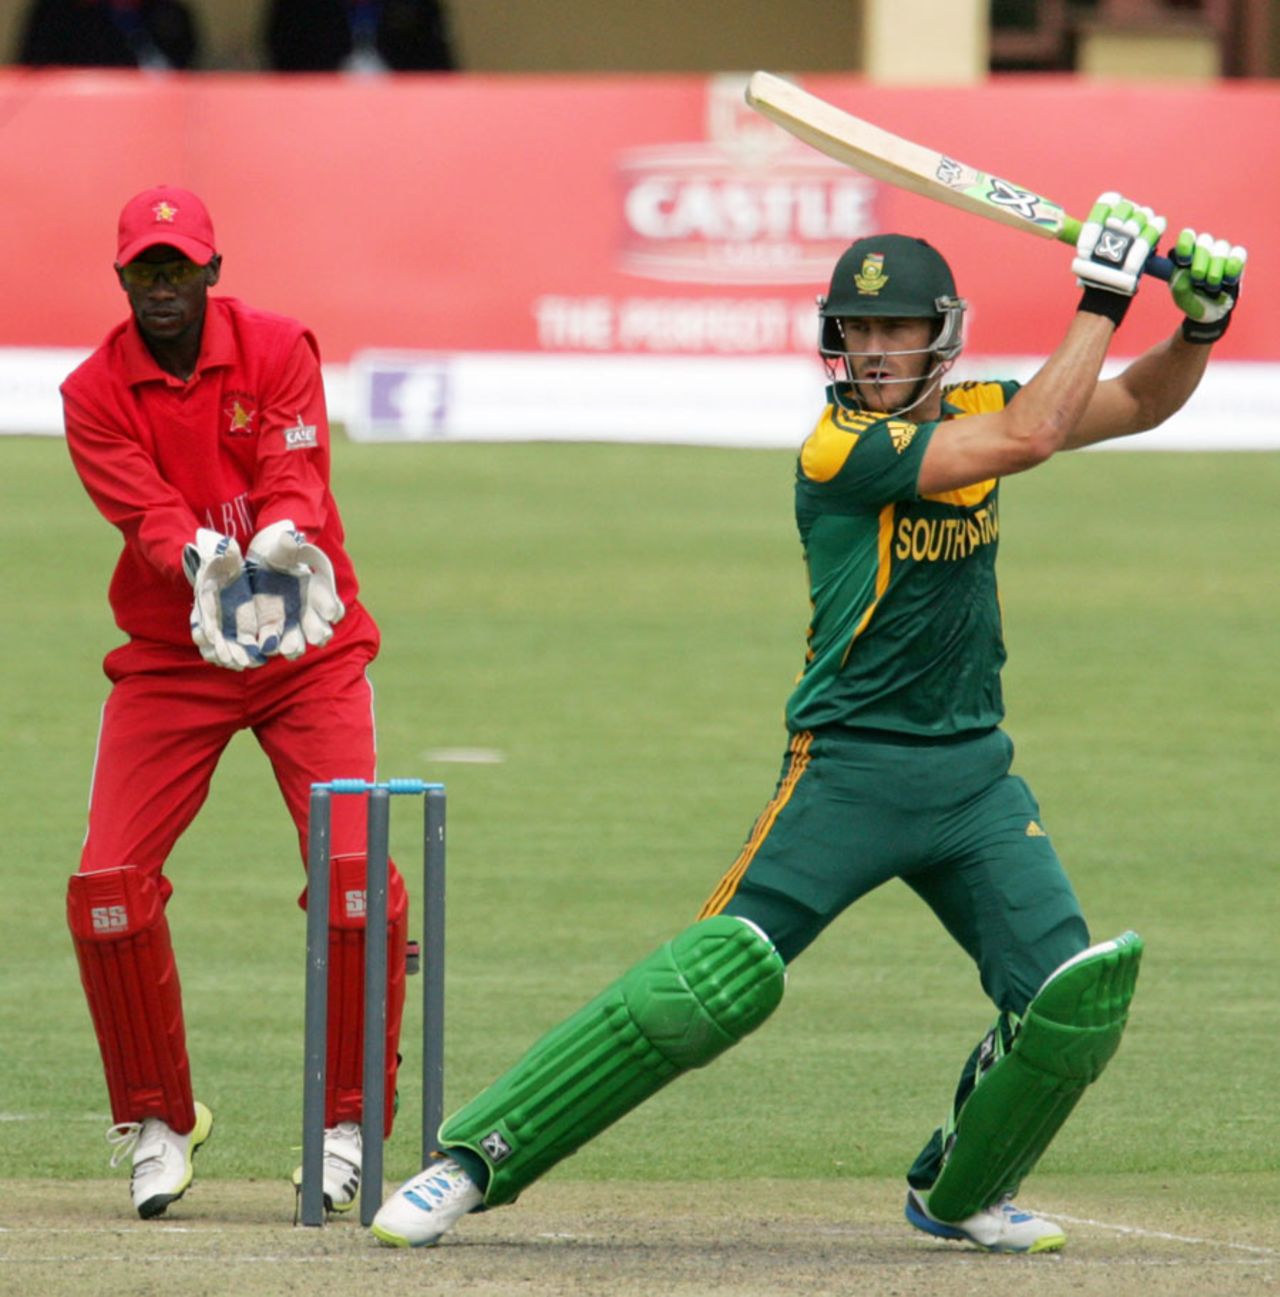 Faf du Plessis chipped in with 59, Zimbabwe v South Africa, 1st ODI, Bulawayo, August 17, 2014